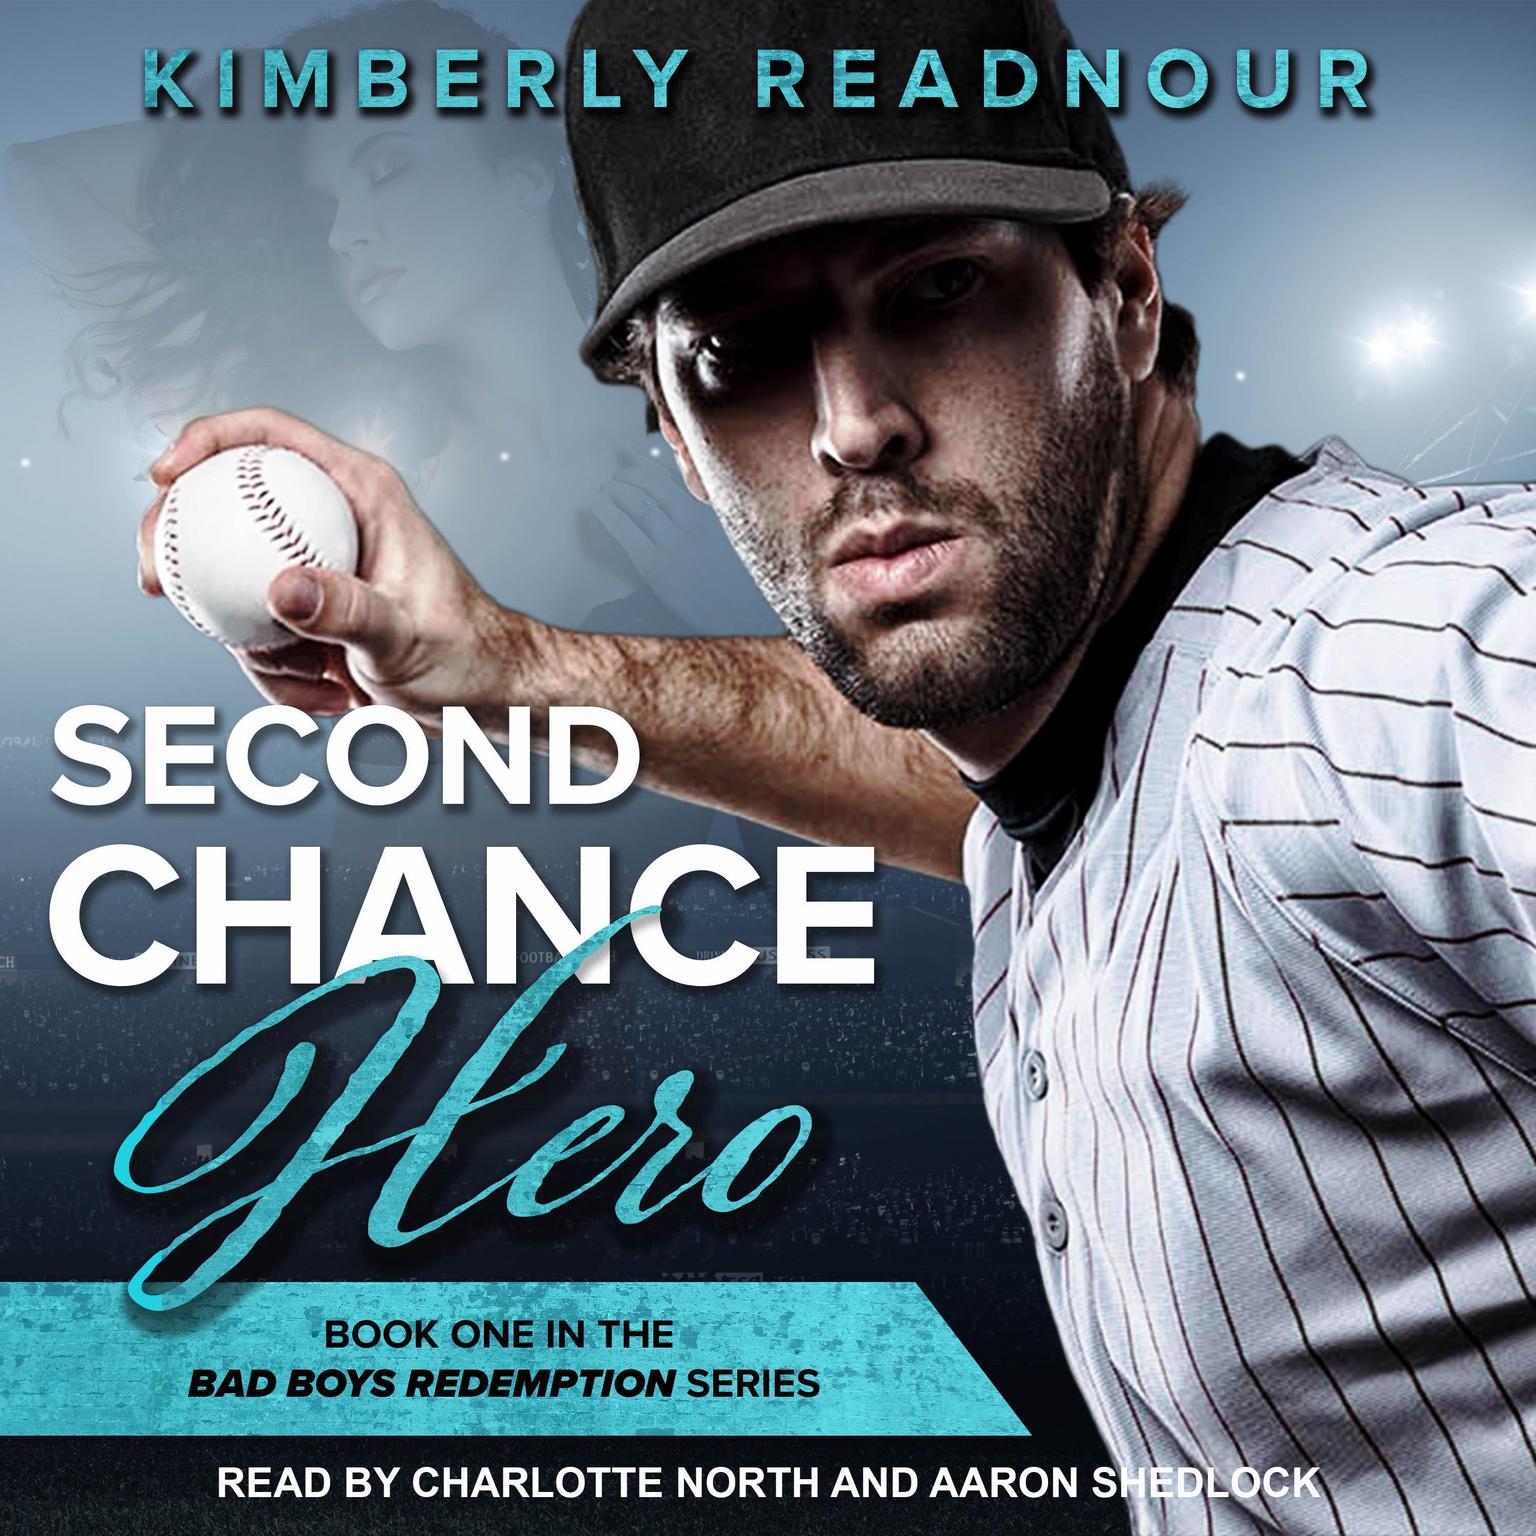 Second Chance Hero Audiobook, by Kimberly Readnour